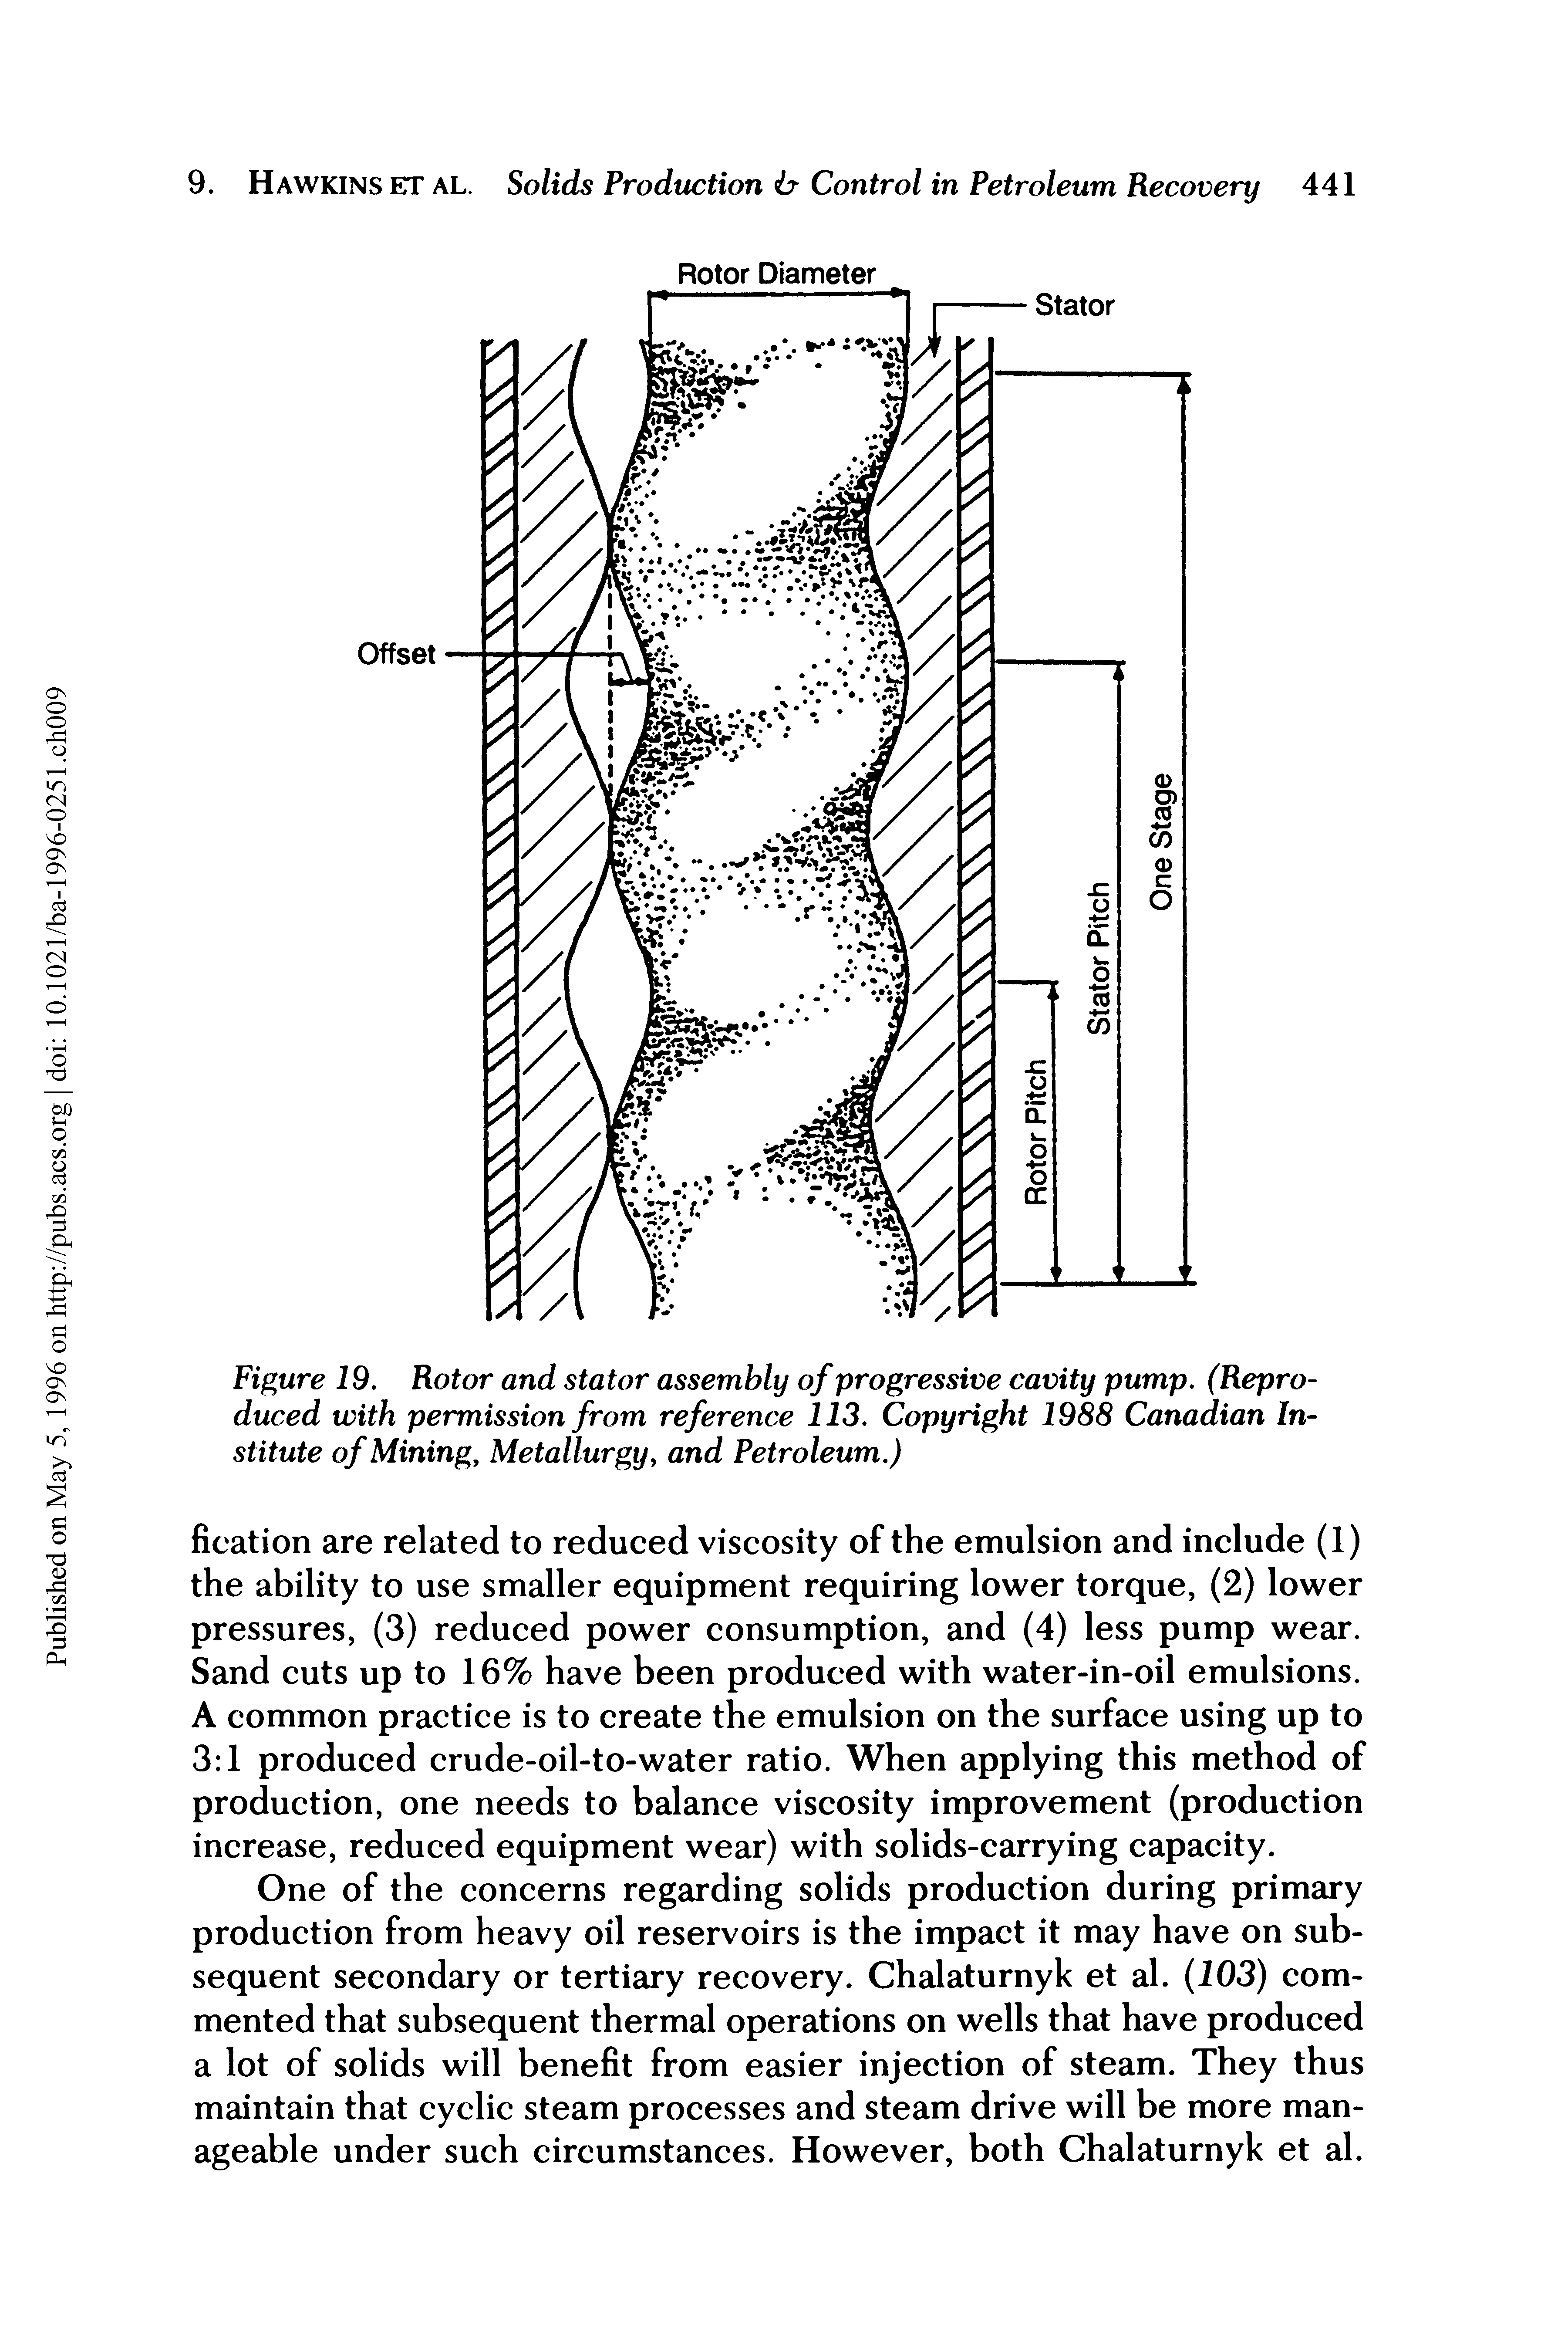 Figure 19. Rotor and stator assembly of progressive cavity pump. (Reproduced with permission from reference 113. Copyright 1988 Canadian Institute of Mining, Metallurgy, and Petroleum.)...